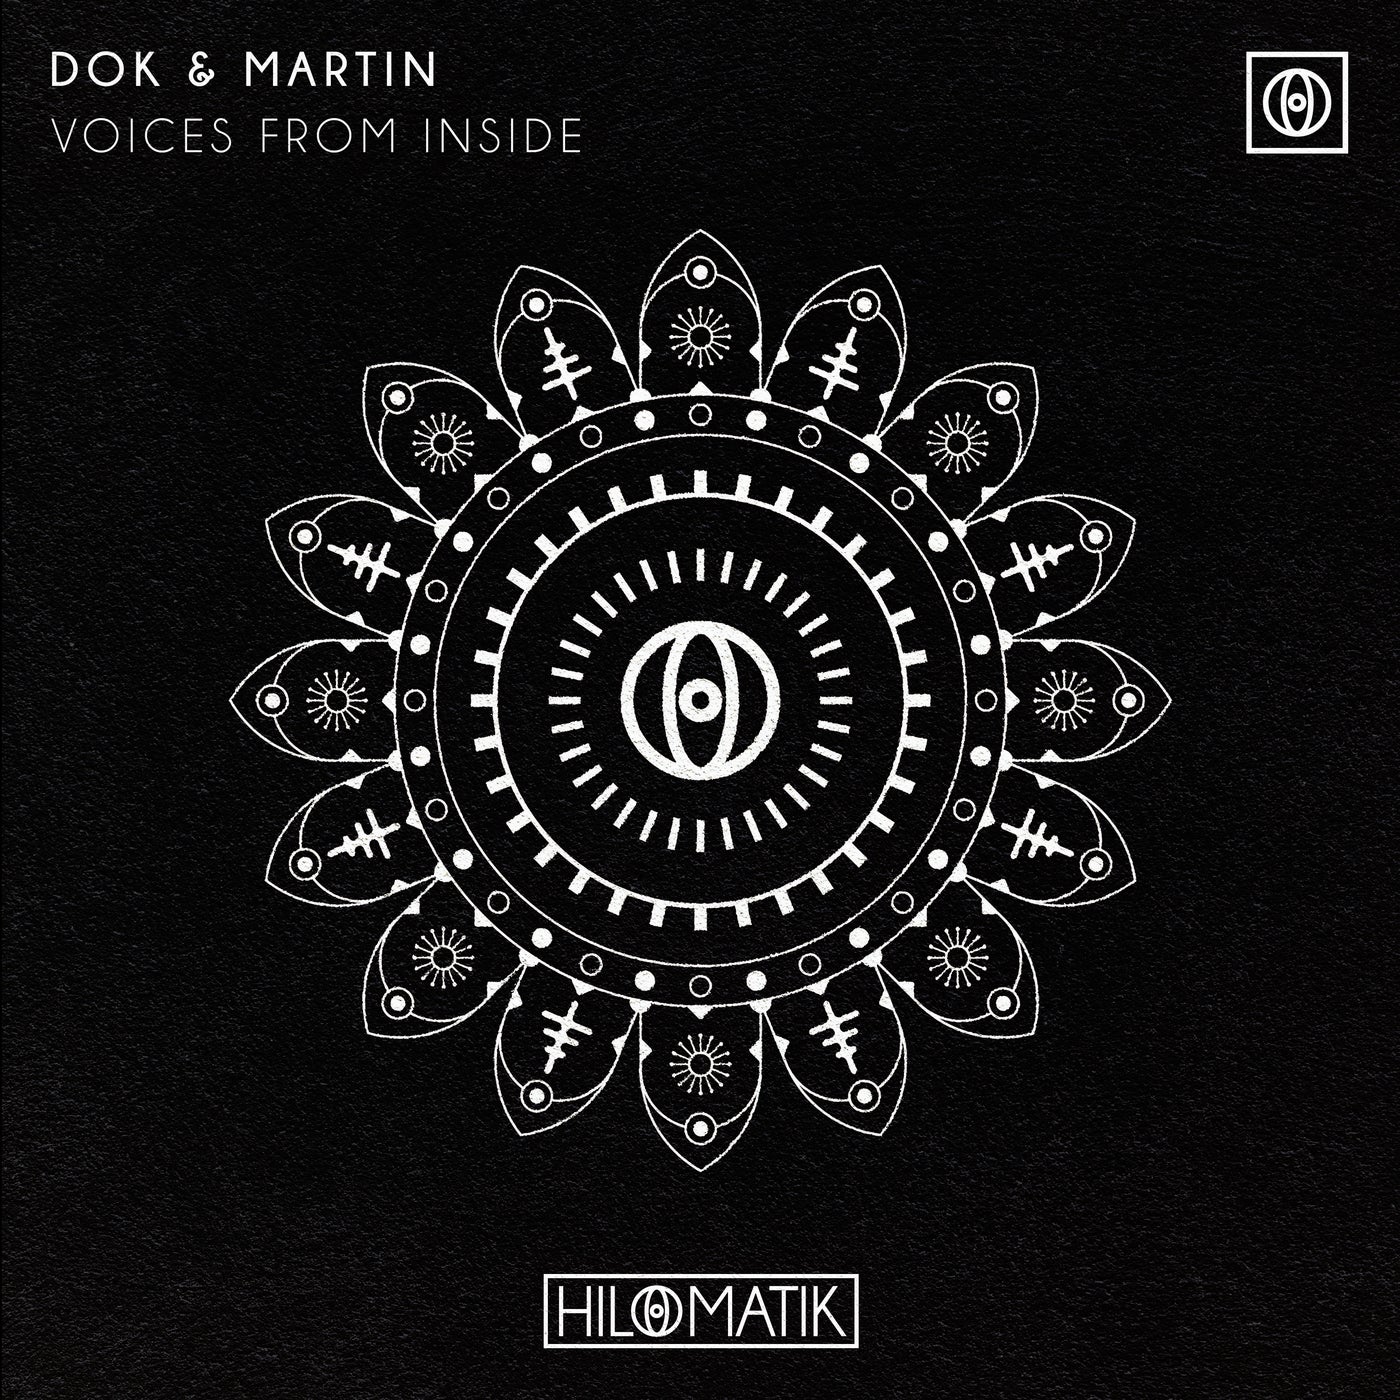 image cover: Dok & Martin - Voices From Inside (Extended Mix) on HILOMATIK